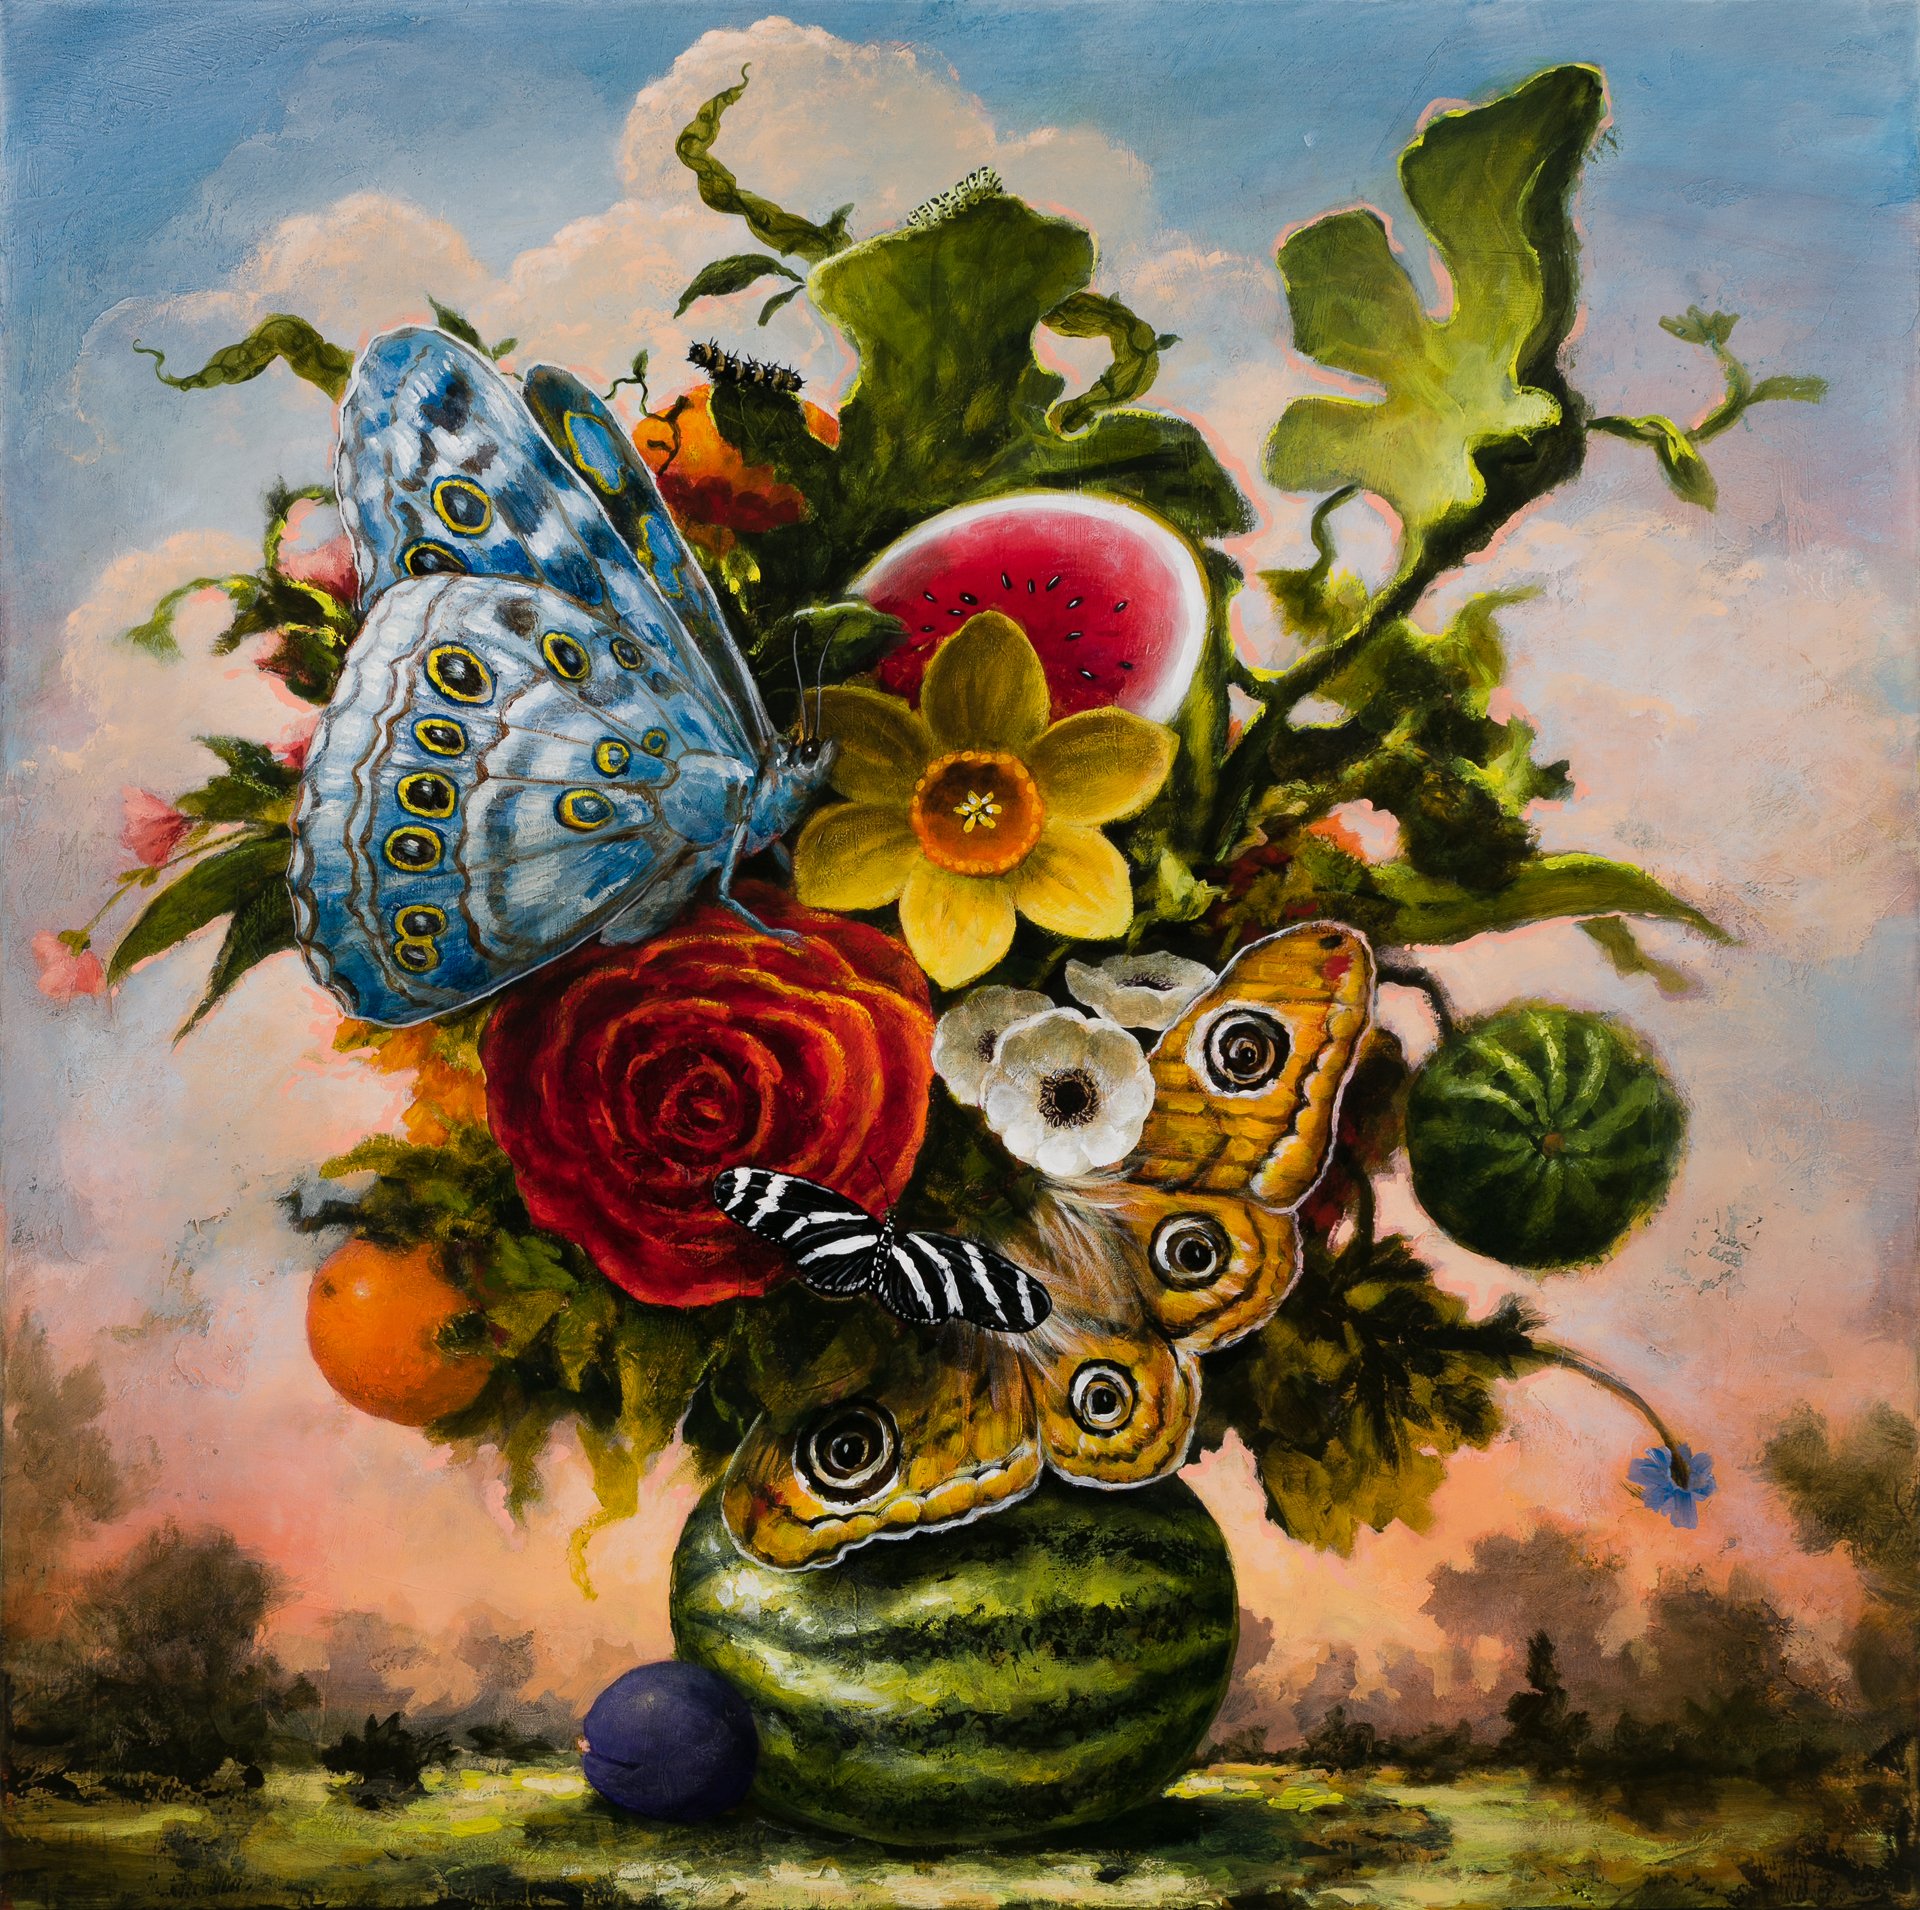 Arcadian Congregation With Moths and Watermelons, 36"x36"